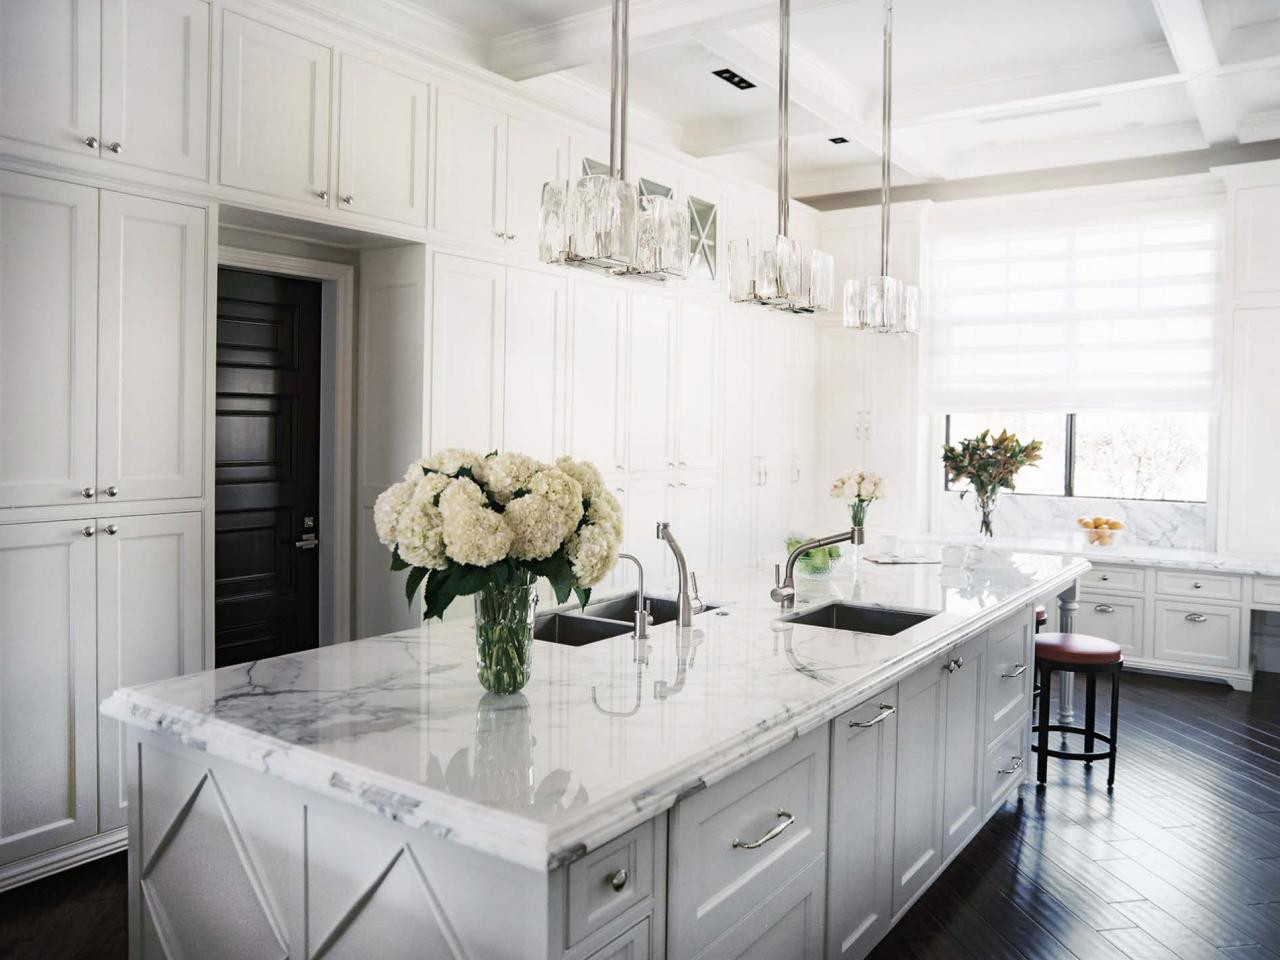 White Kitchen Remodeling
 Kitchen Remodels With White Cabinets